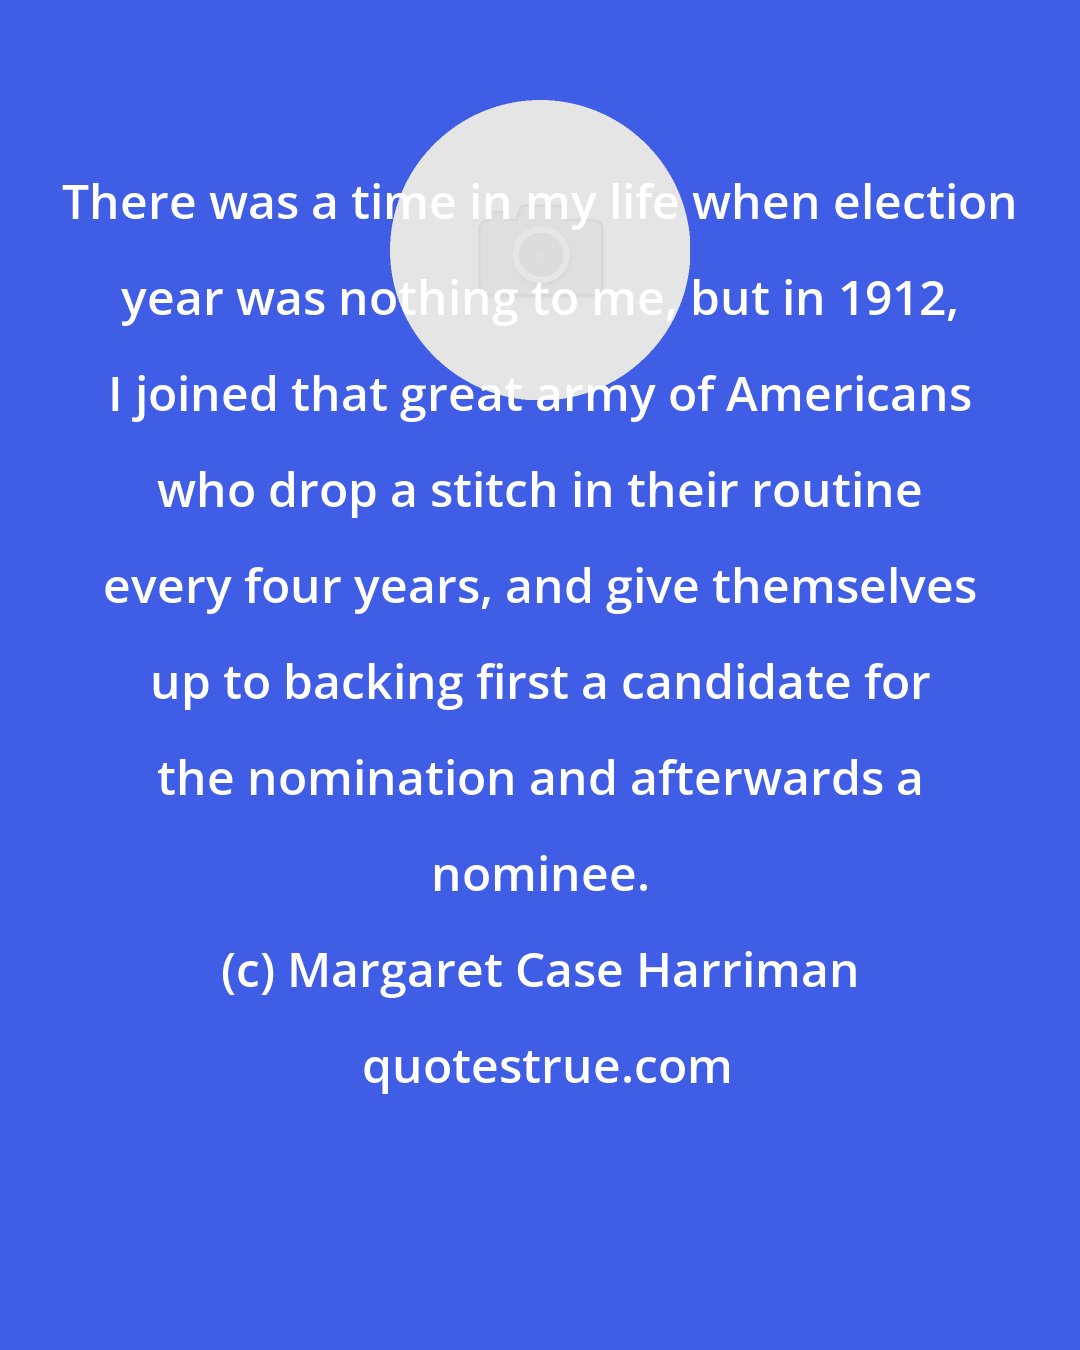 Margaret Case Harriman: There was a time in my life when election year was nothing to me, but in 1912, I joined that great army of Americans who drop a stitch in their routine every four years, and give themselves up to backing first a candidate for the nomination and afterwards a nominee.